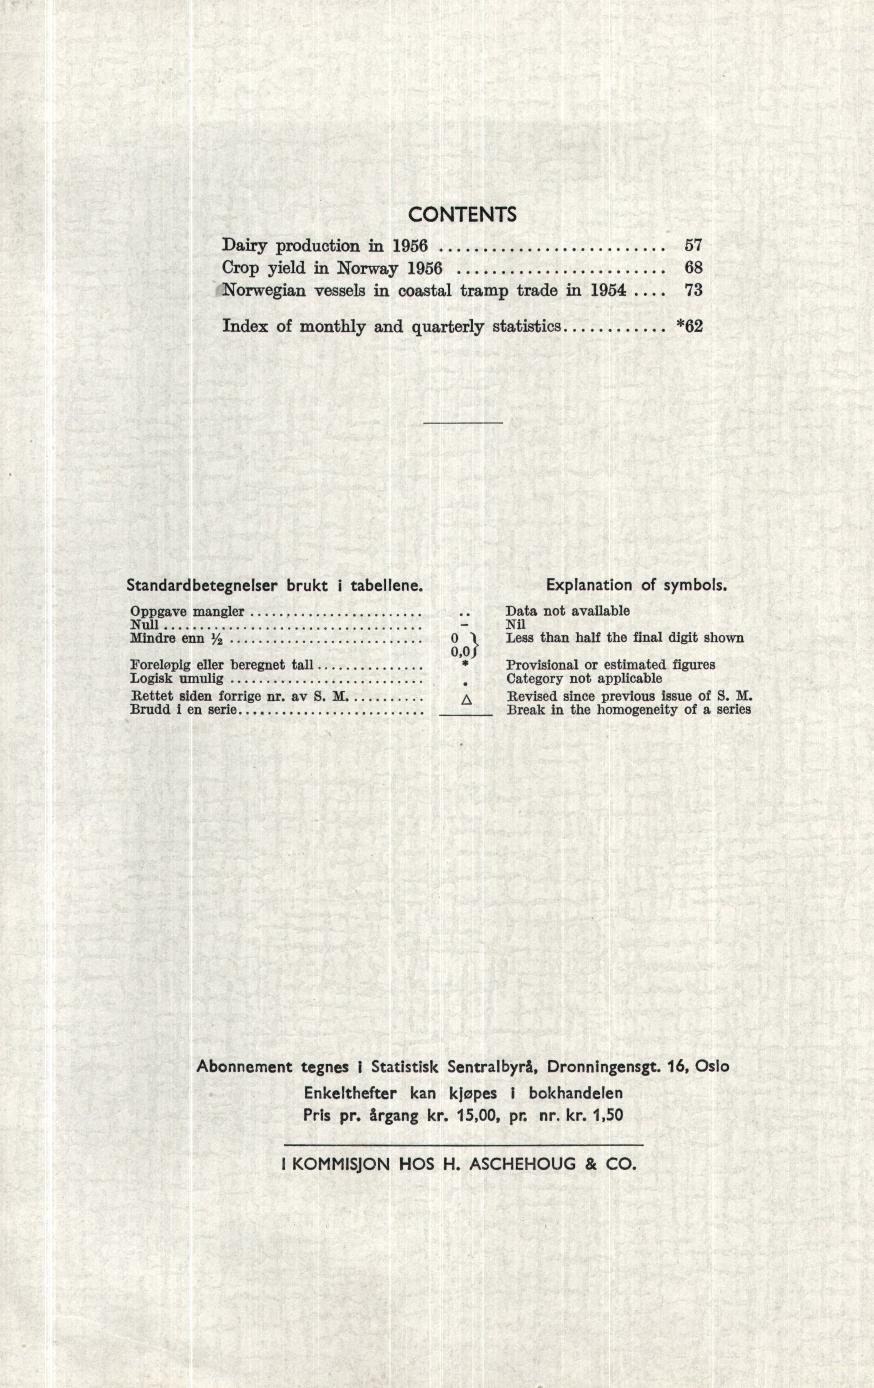 CONTENTS Dairy production in 1956 Crop yield in Norway 1956 Norwegian vessels in coastal tramp trade in 1954 Index of monthly and quarterly statistics 1.